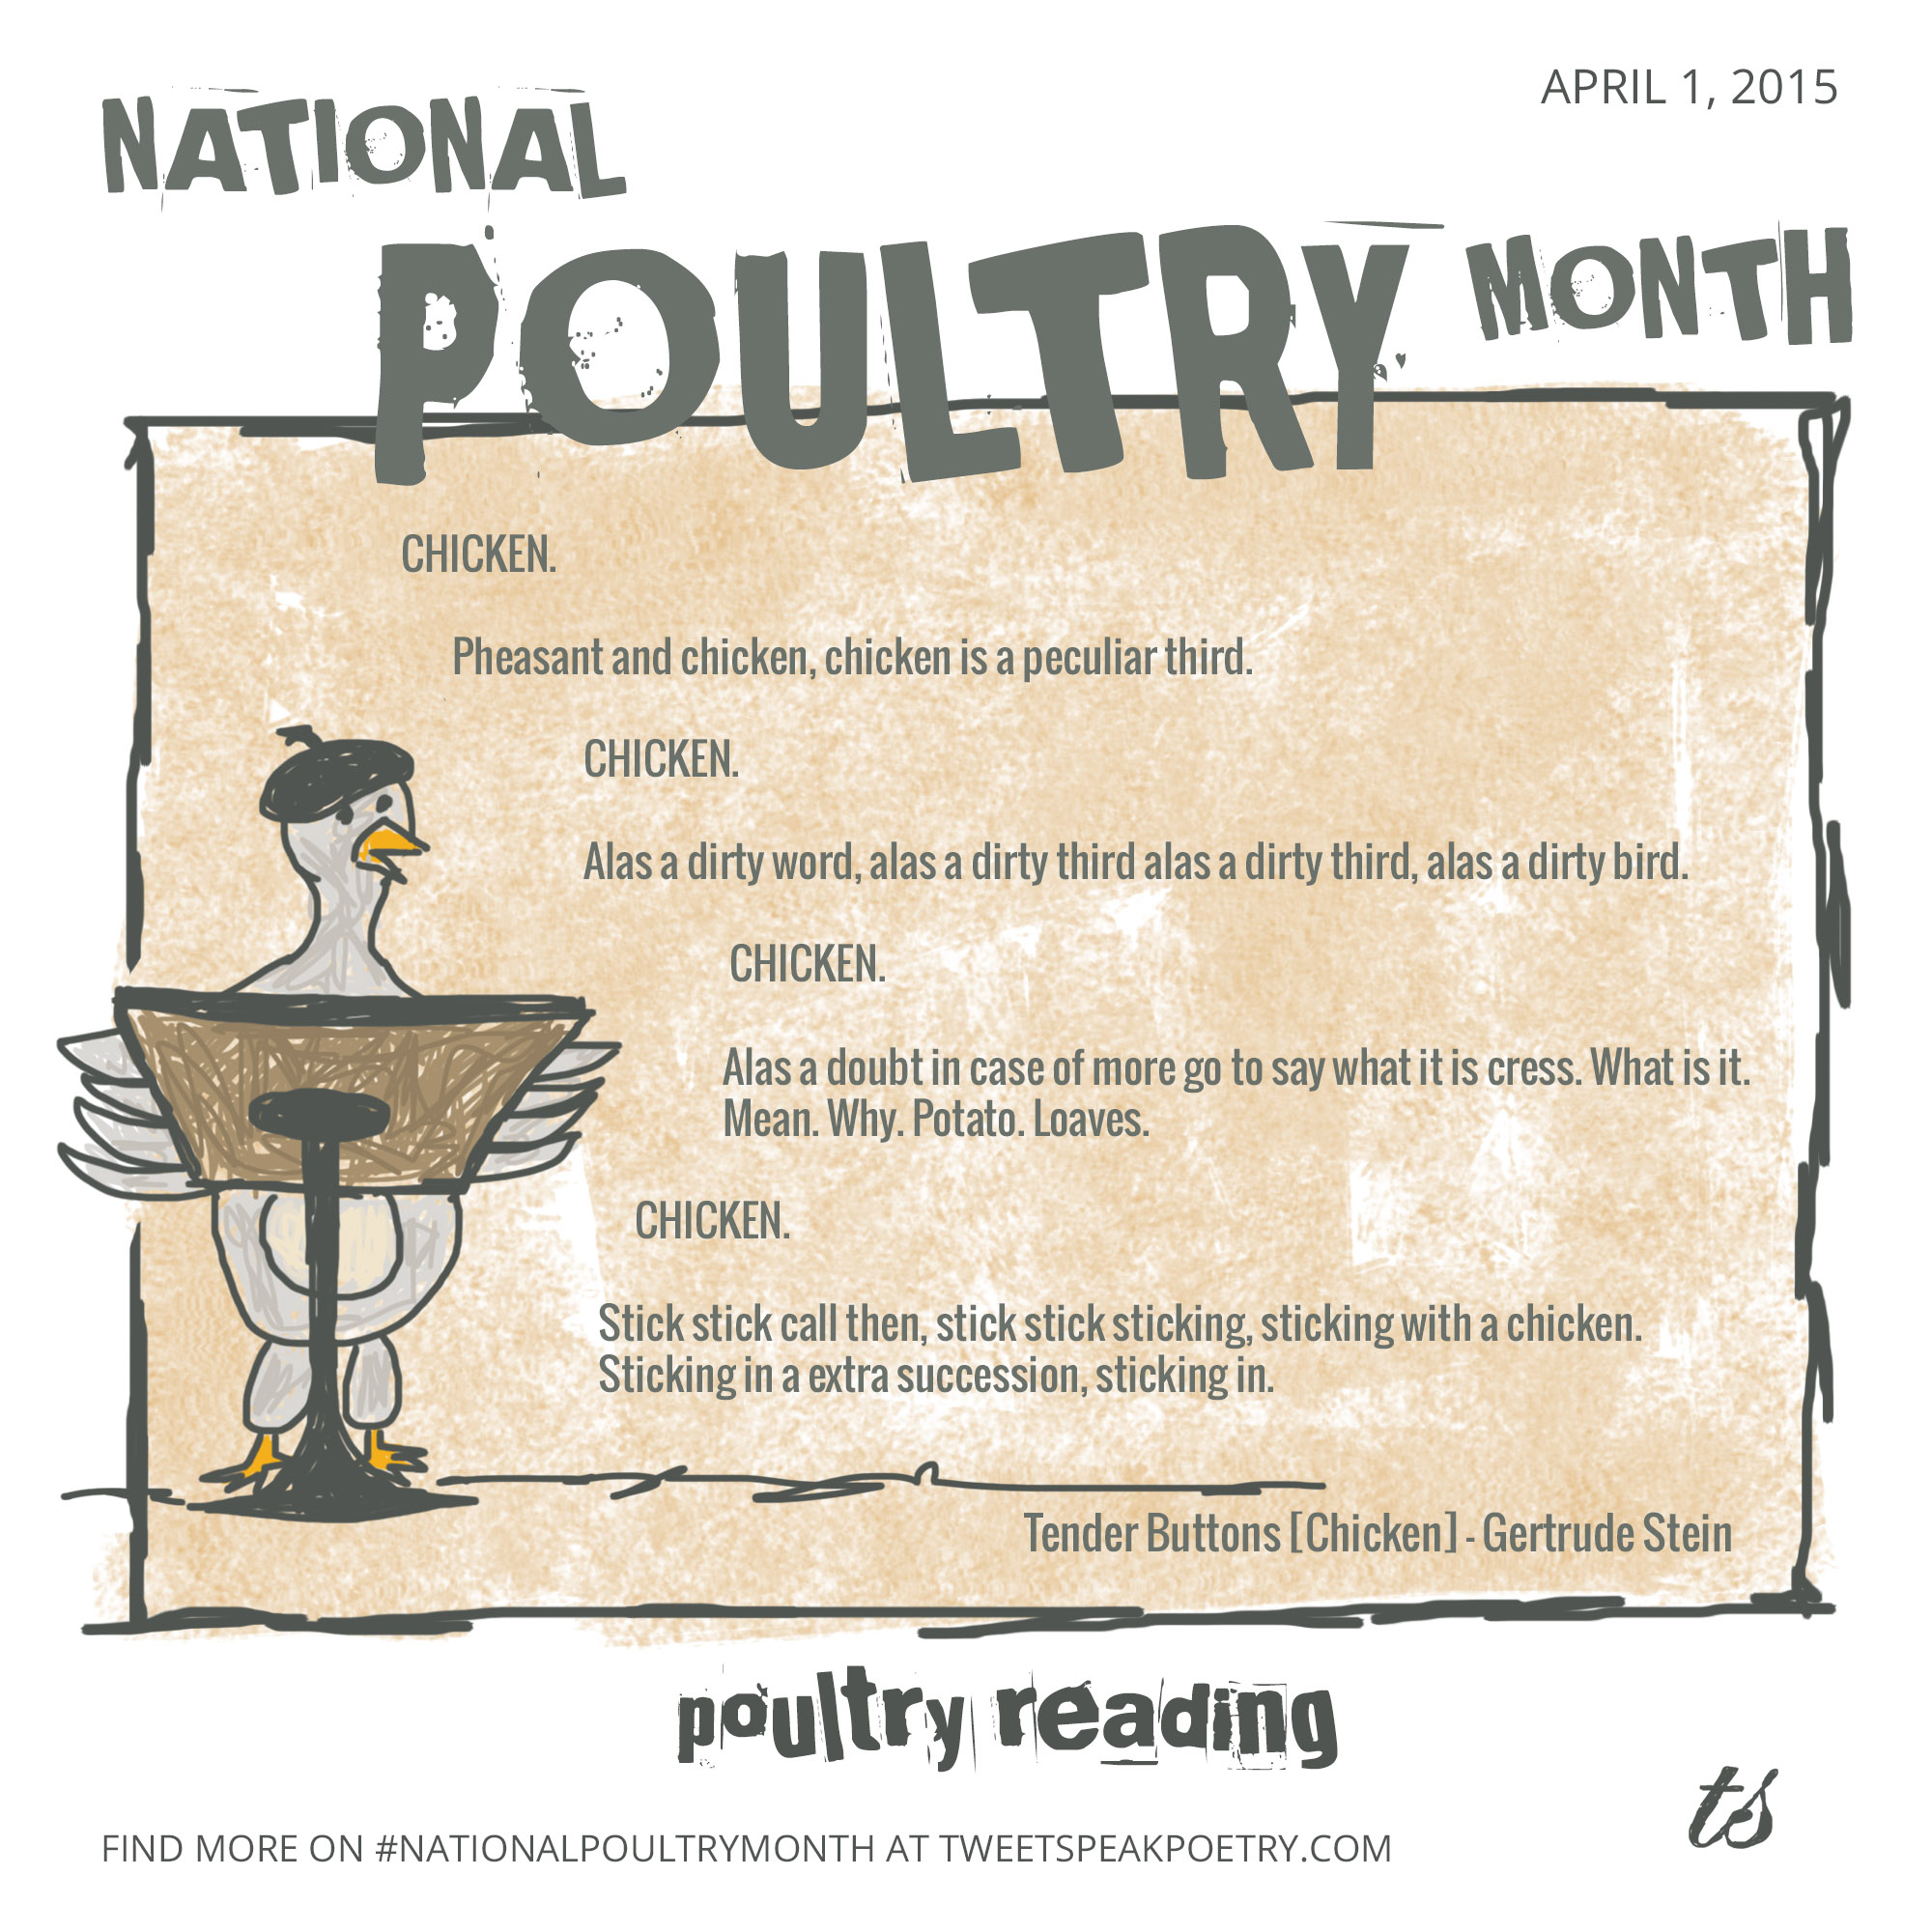 National Poultry Month: Poultry Reading